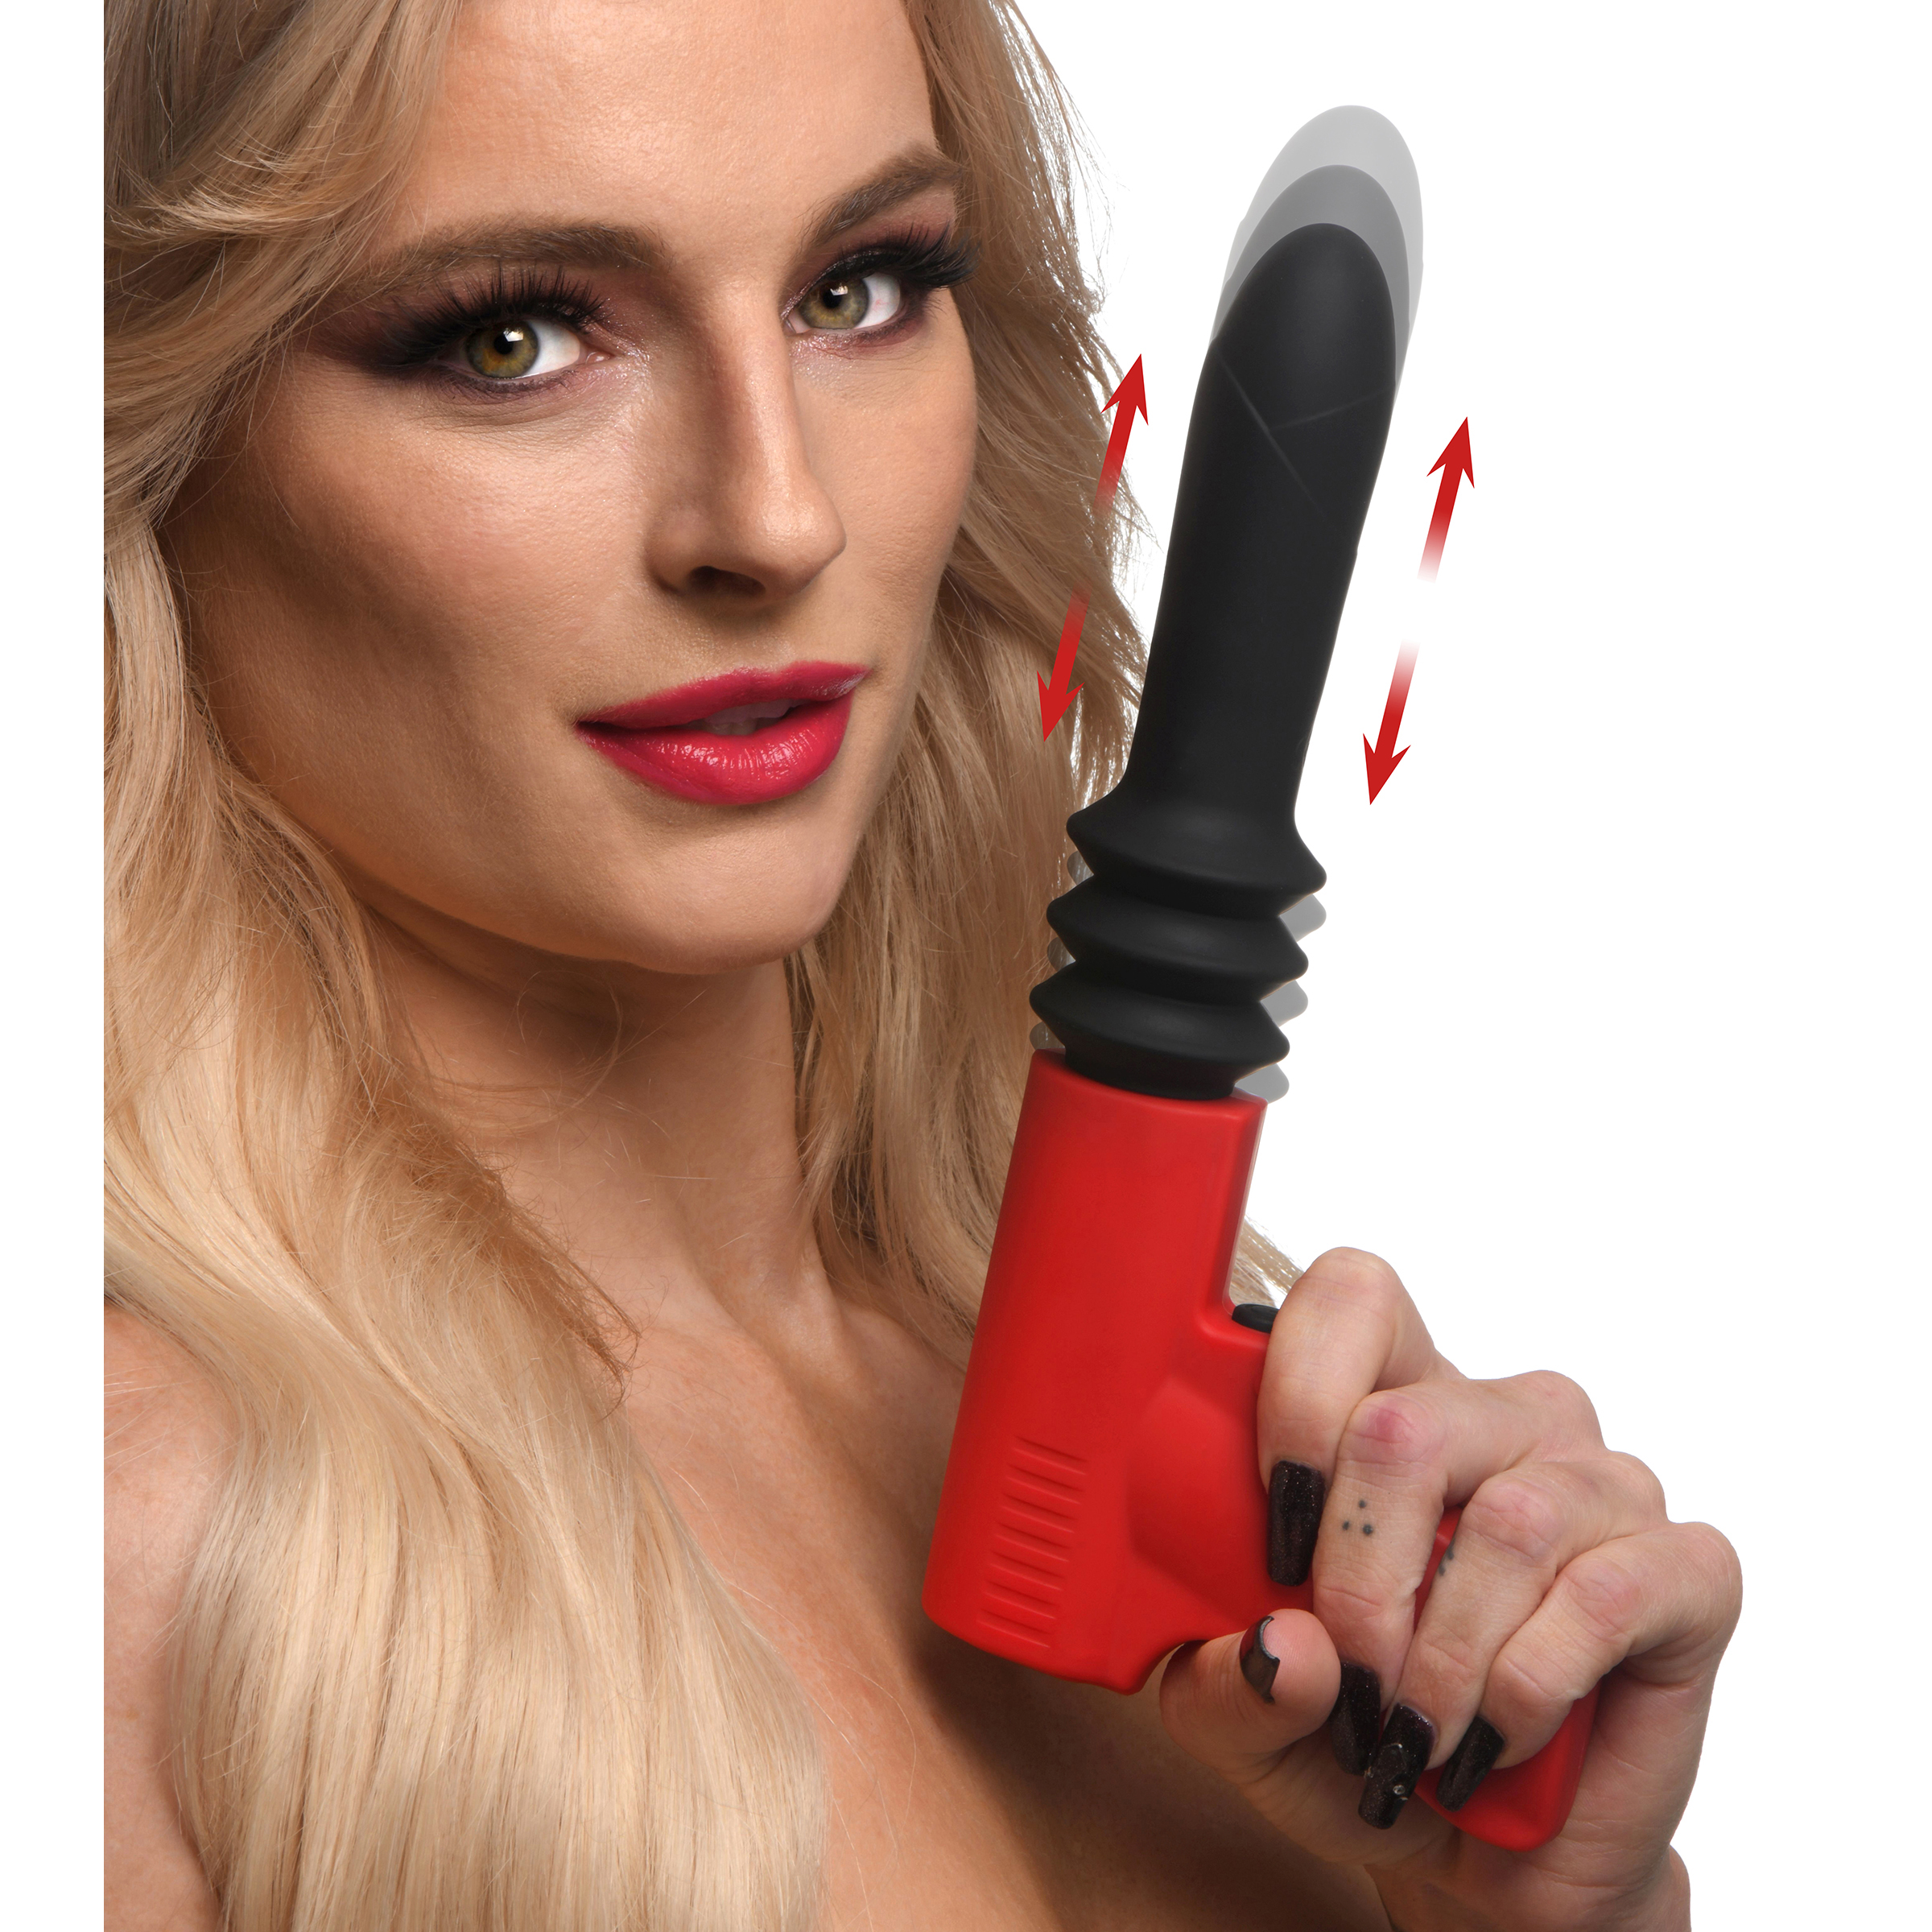 Give yourself some serious pounding with this Pistol Pounder! With 4 different settings you can enjoy simultaneous thrusting and vibrating from the silicone shaft. The premium silicone is silky smooth